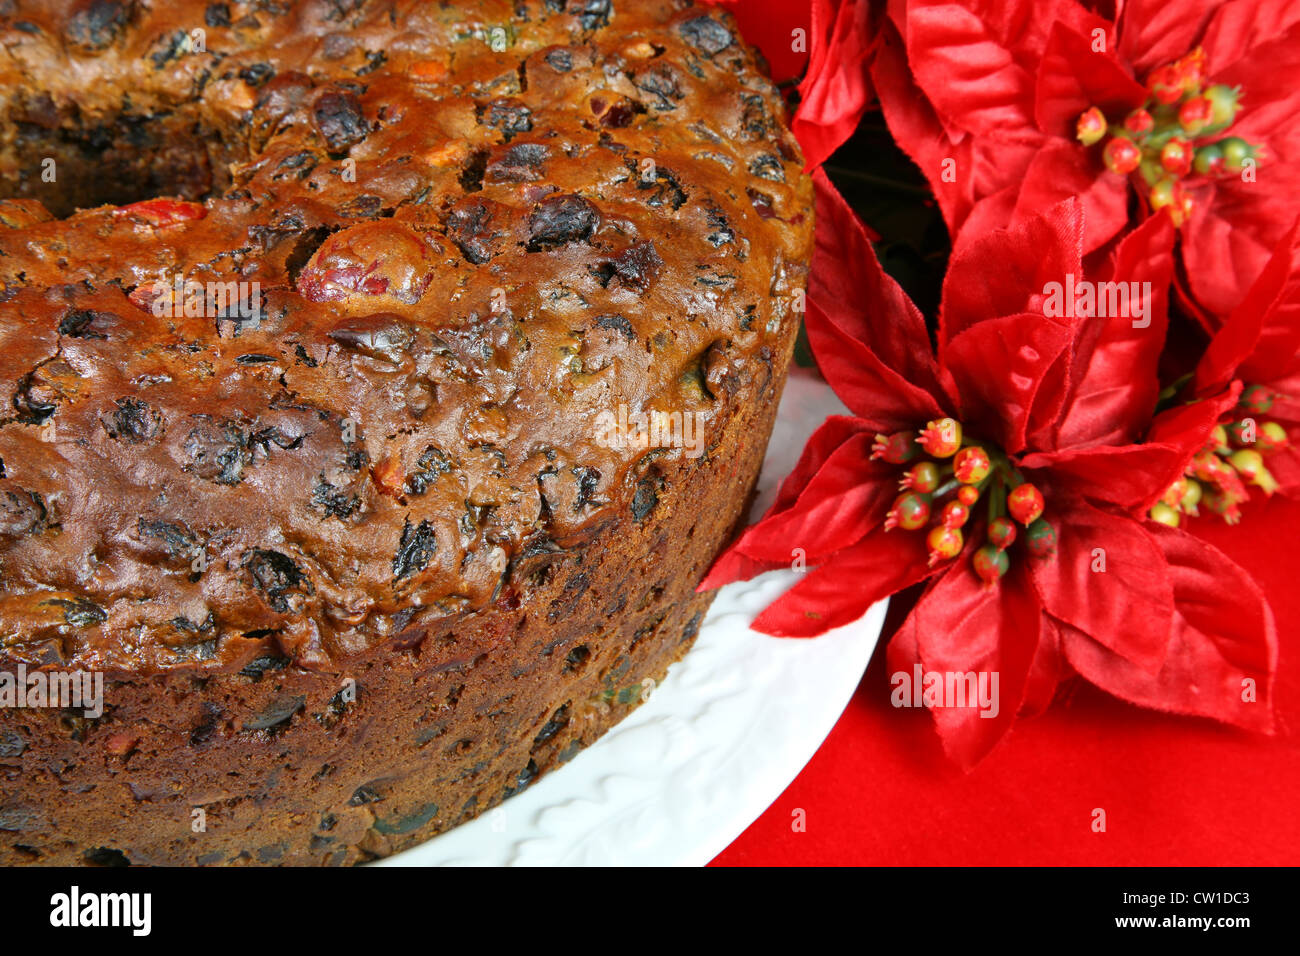 Homemade traditional Christmas fruitcake full of cherries, raisin, peel and other candied fruit. Focus is on the cake. Stock Photo